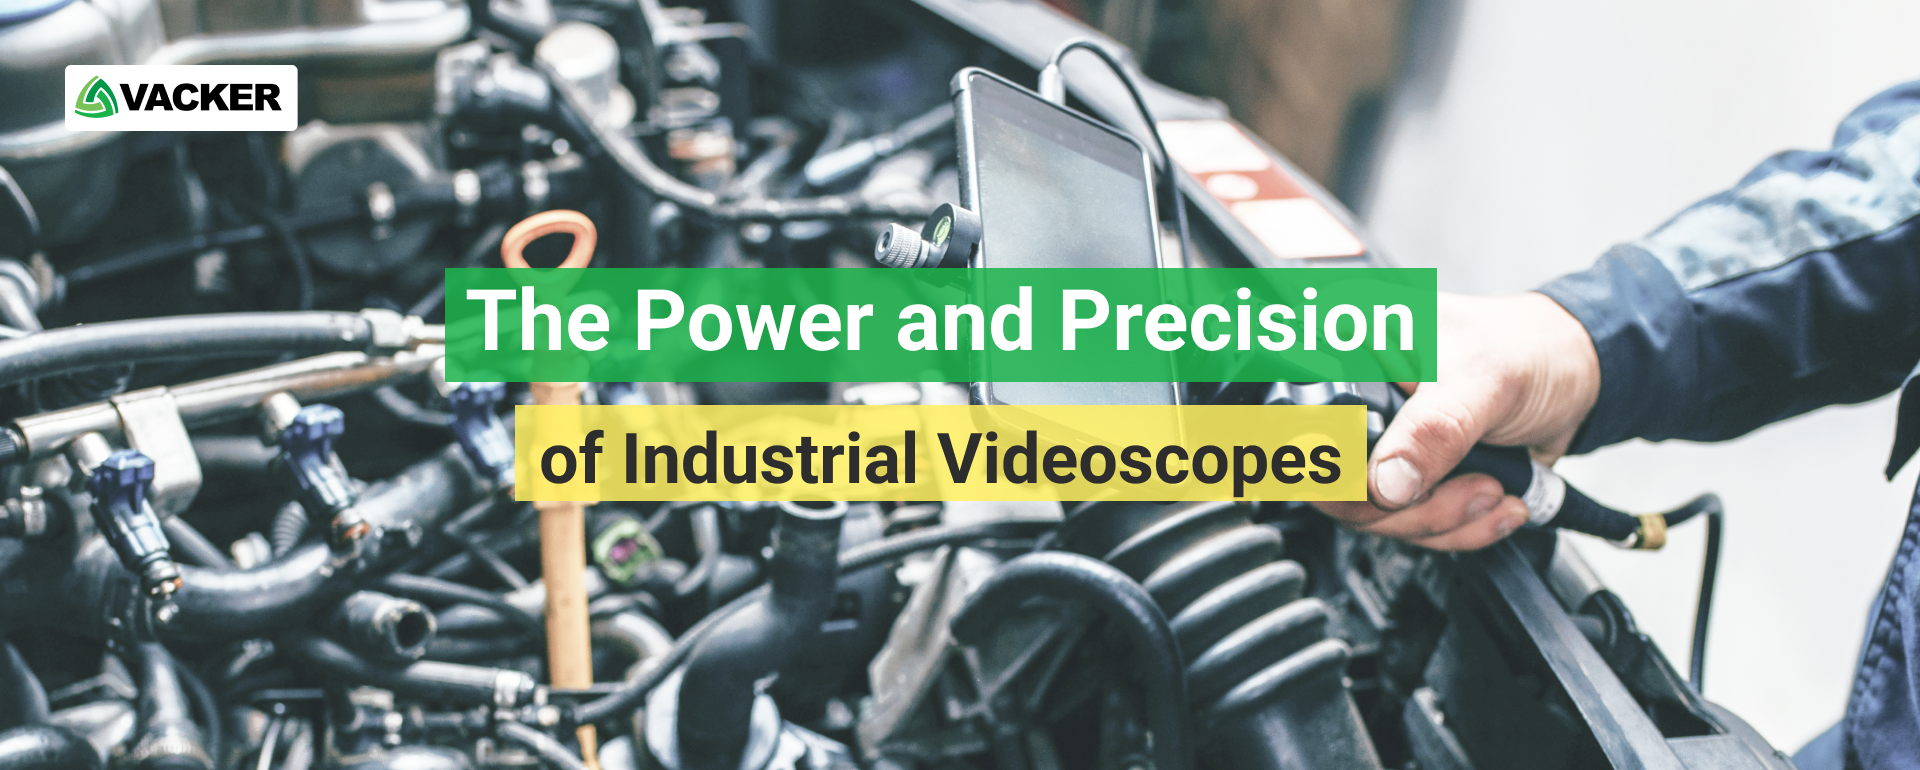 The Power and Precision of Industrial Videoscopes